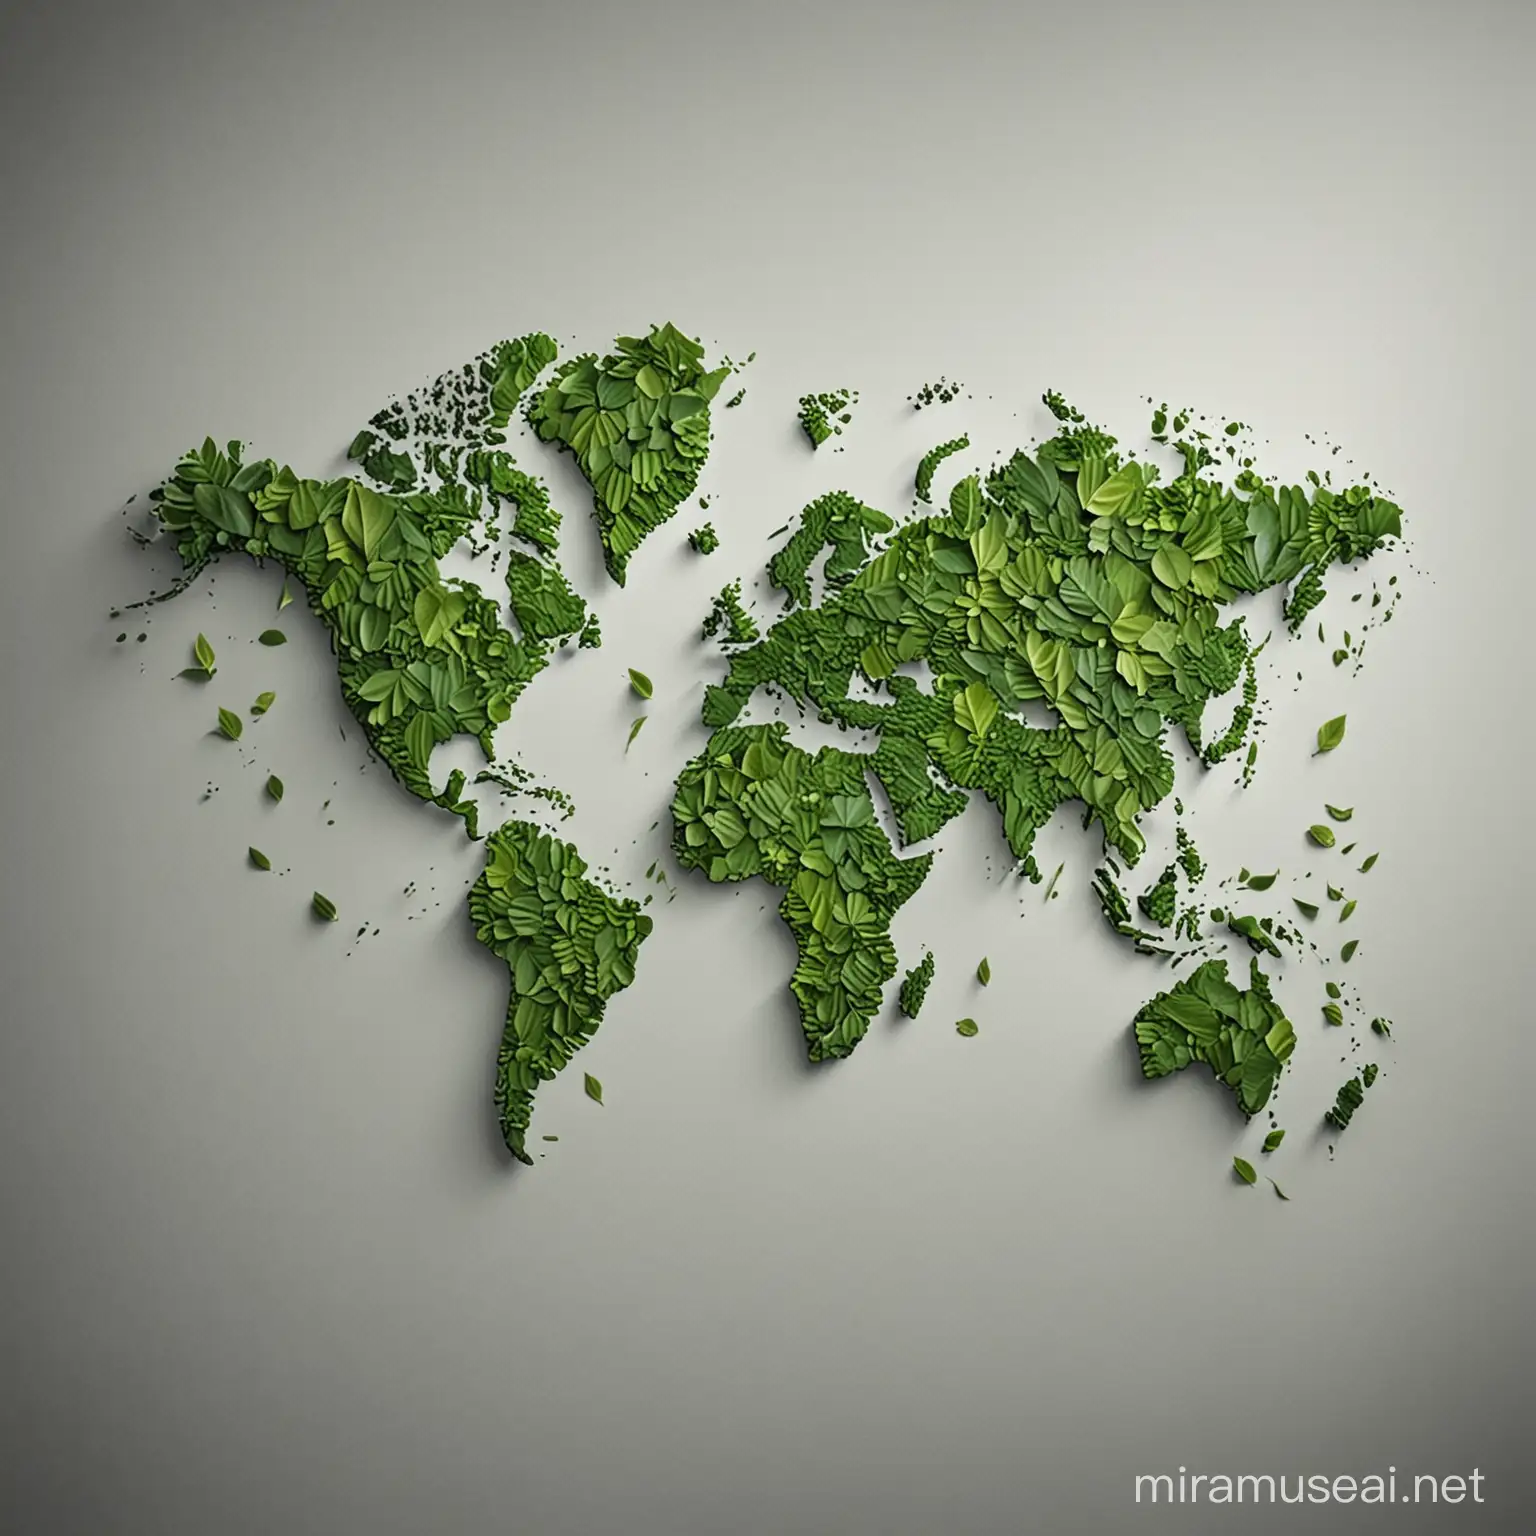 Artistic World Map Crafted from Green Leaves on Gray Background